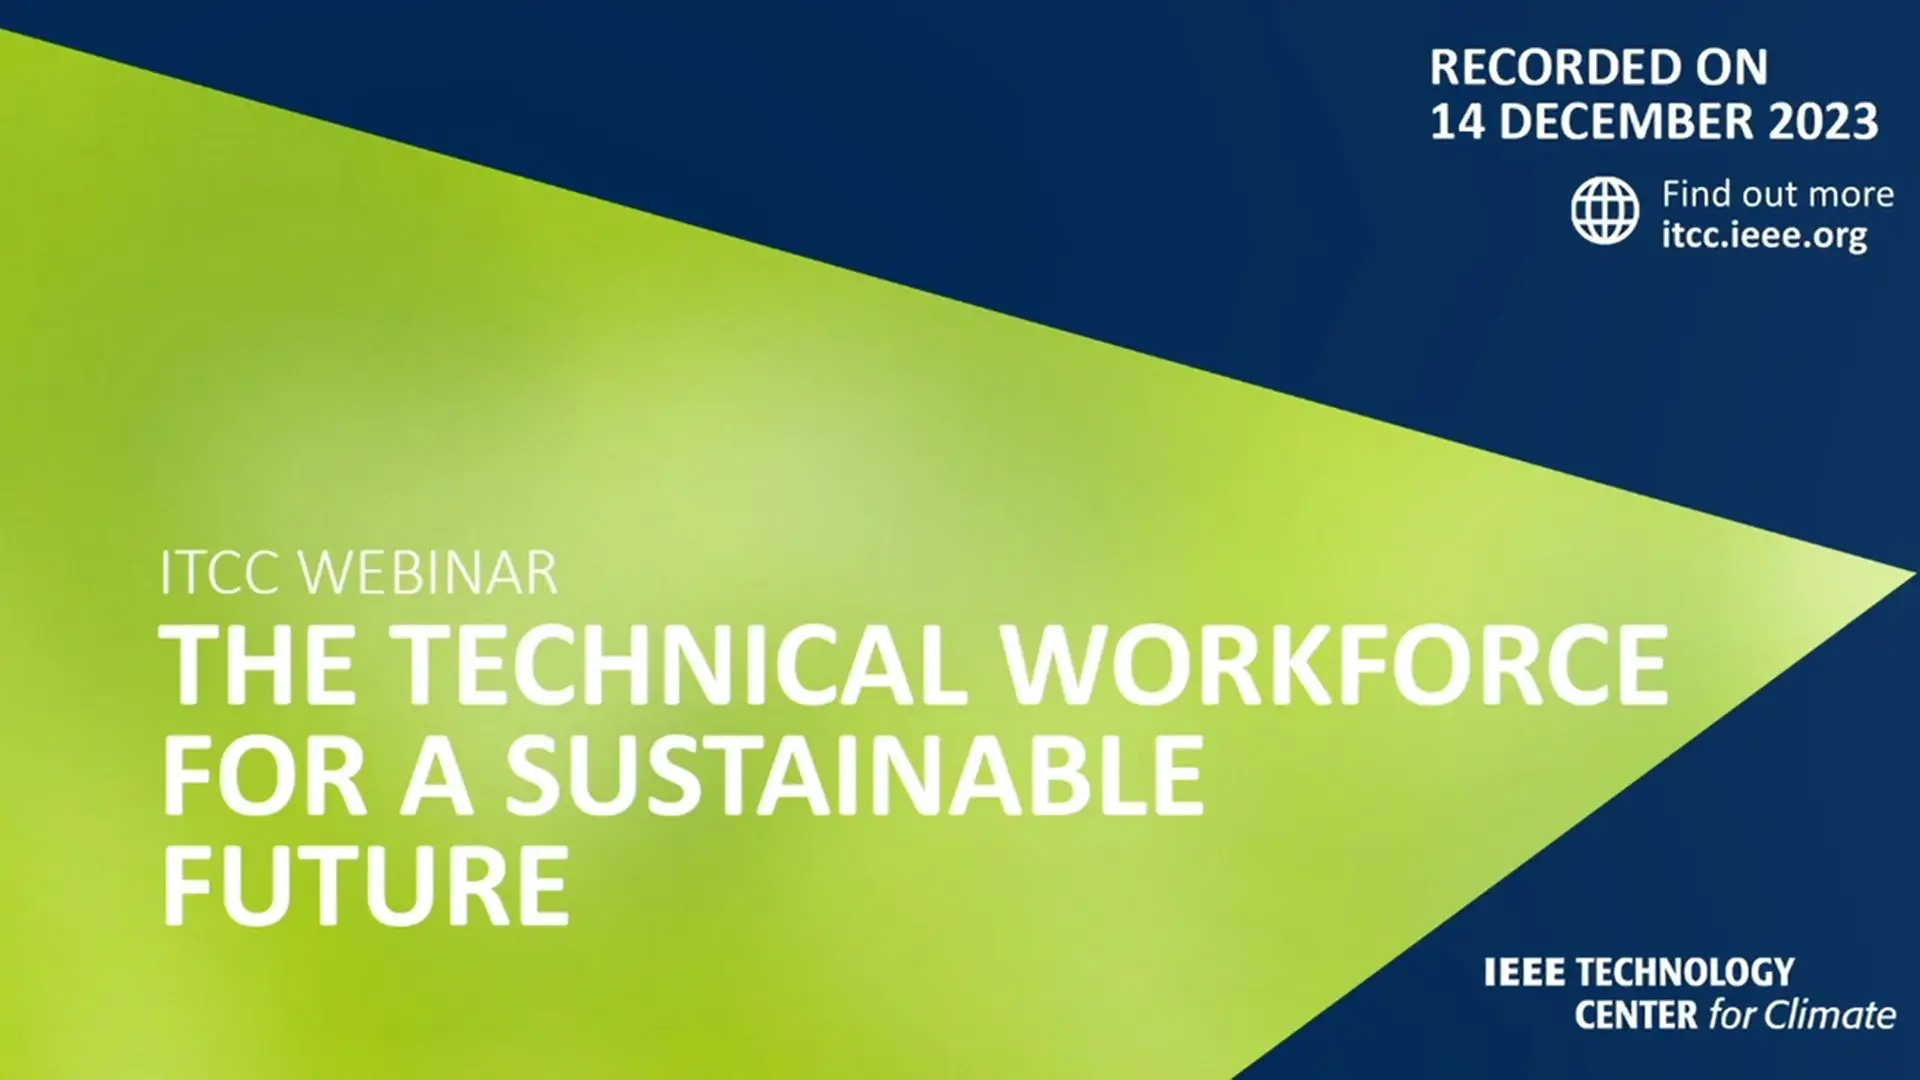 The Technical Workforce for a Sustainable Future